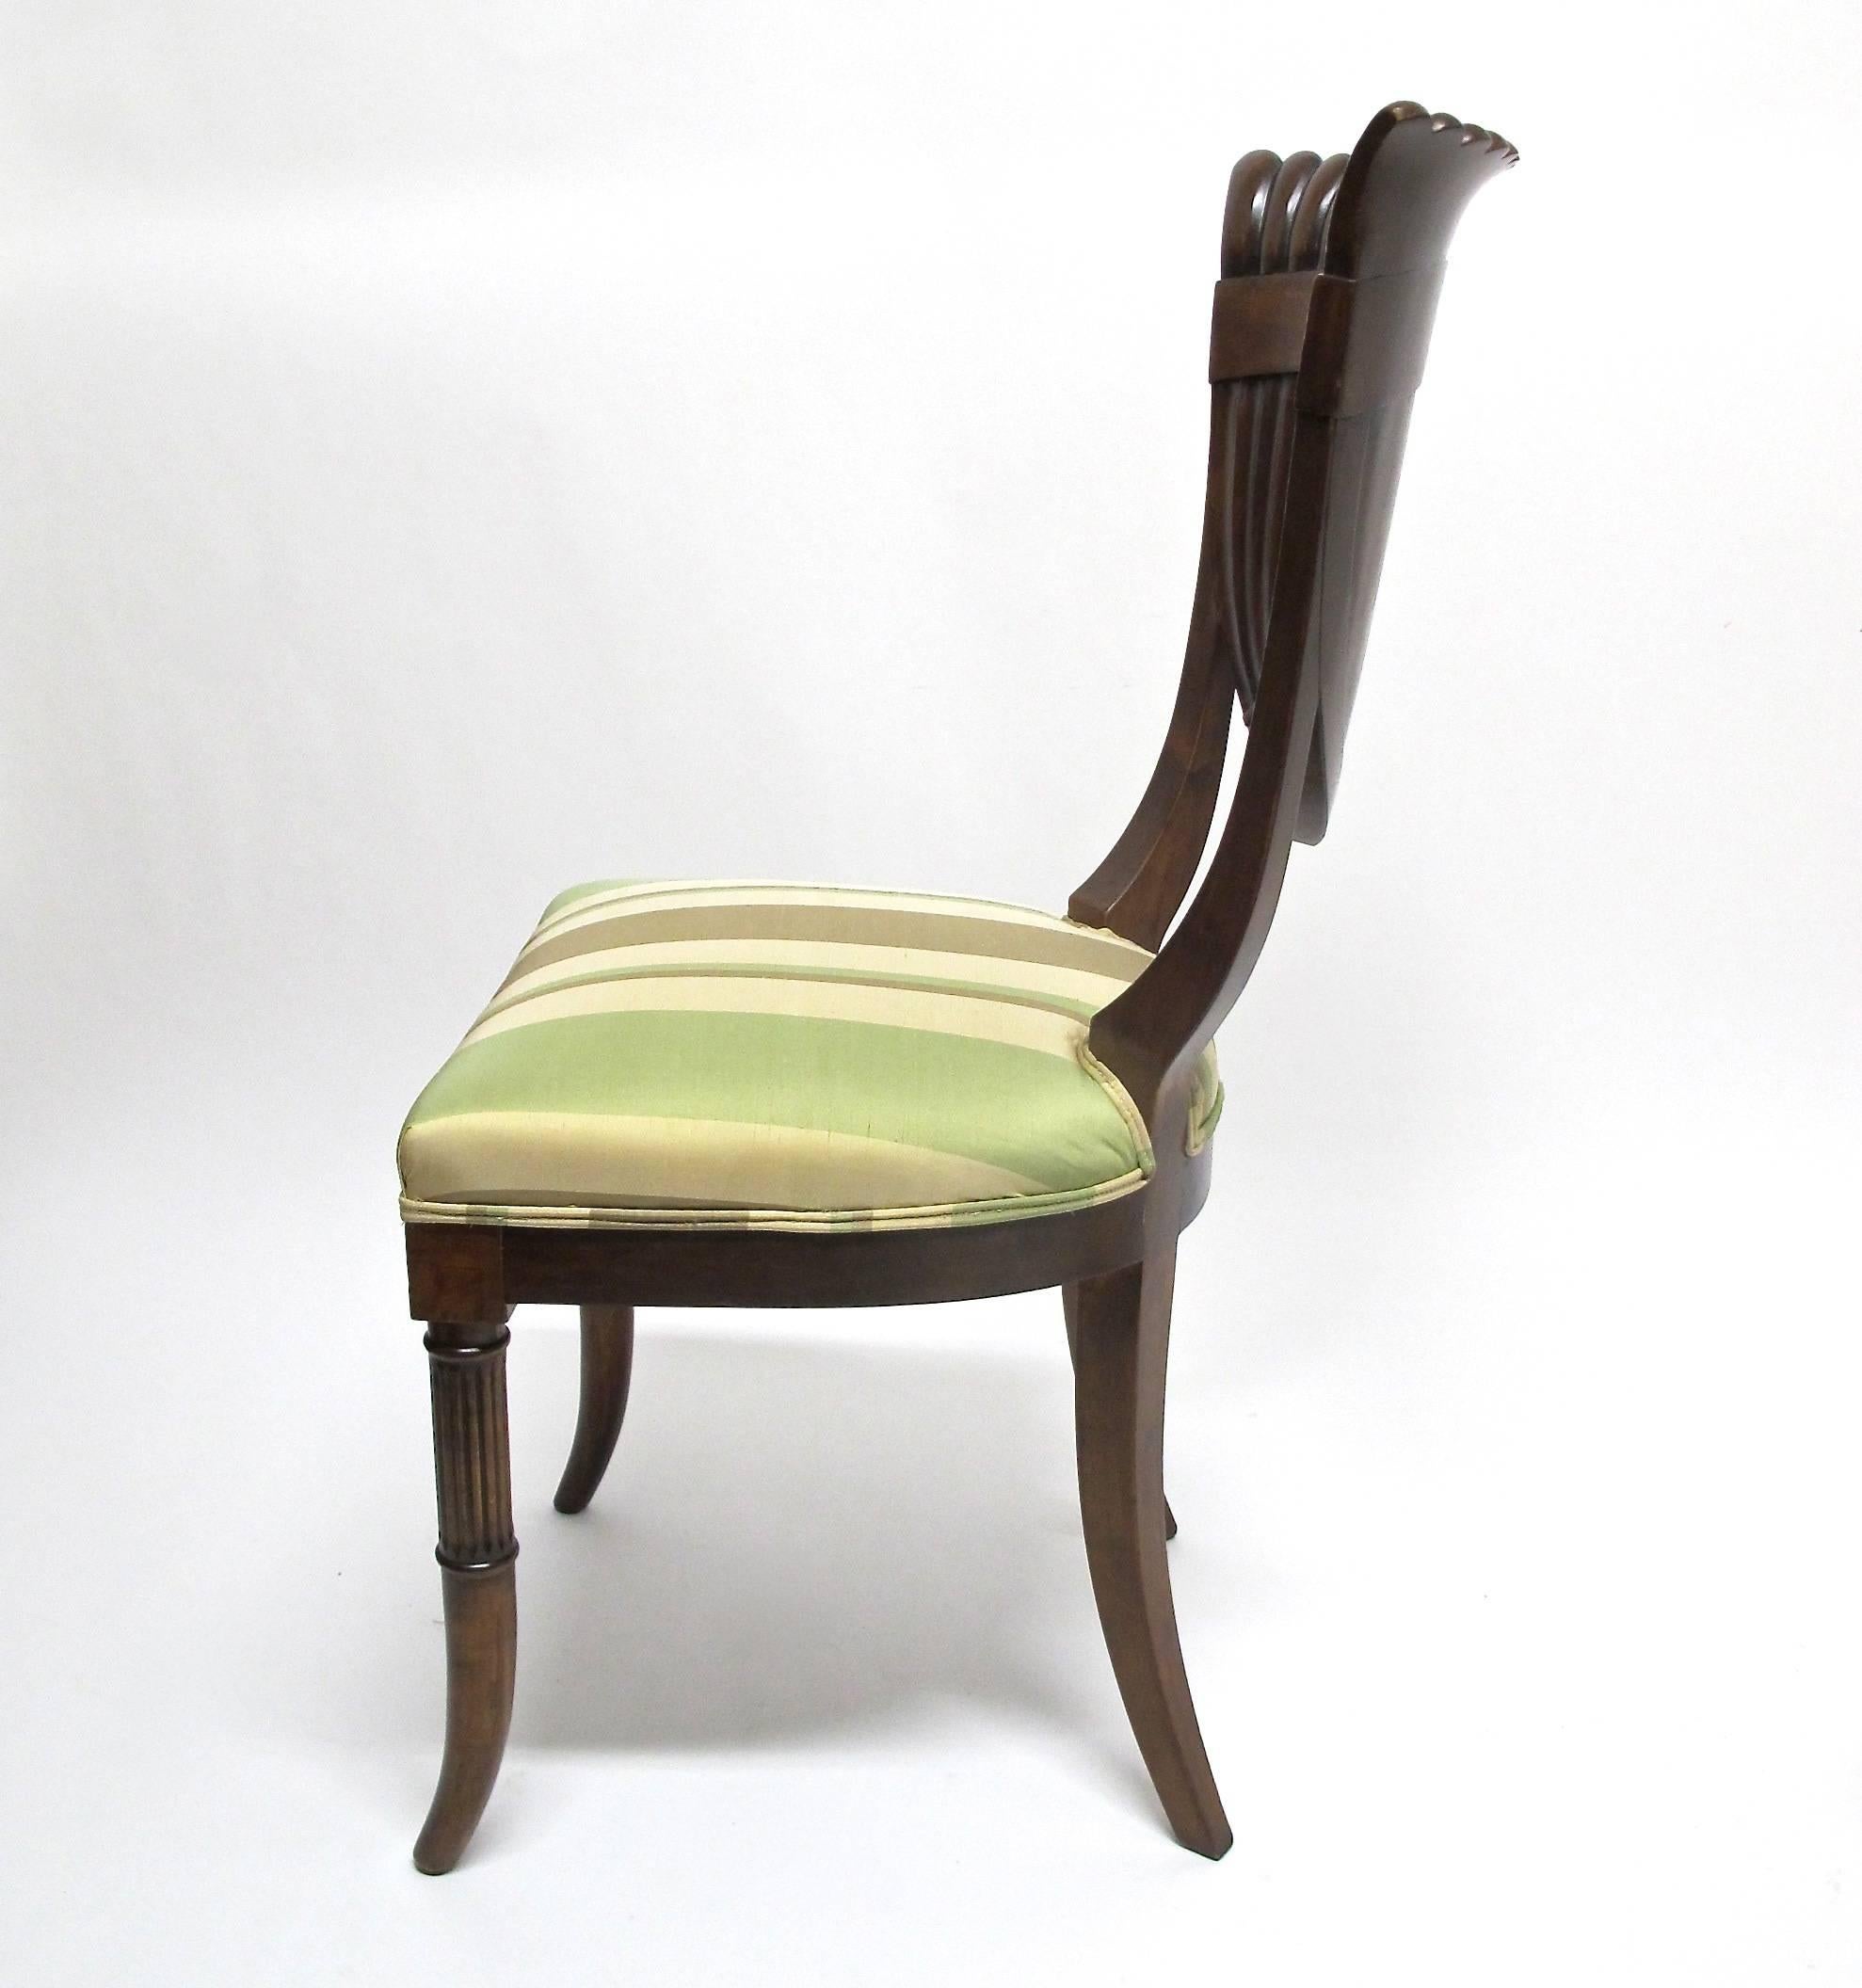 Italian Biedermeier Style Chairs In Excellent Condition For Sale In San Francisco, CA